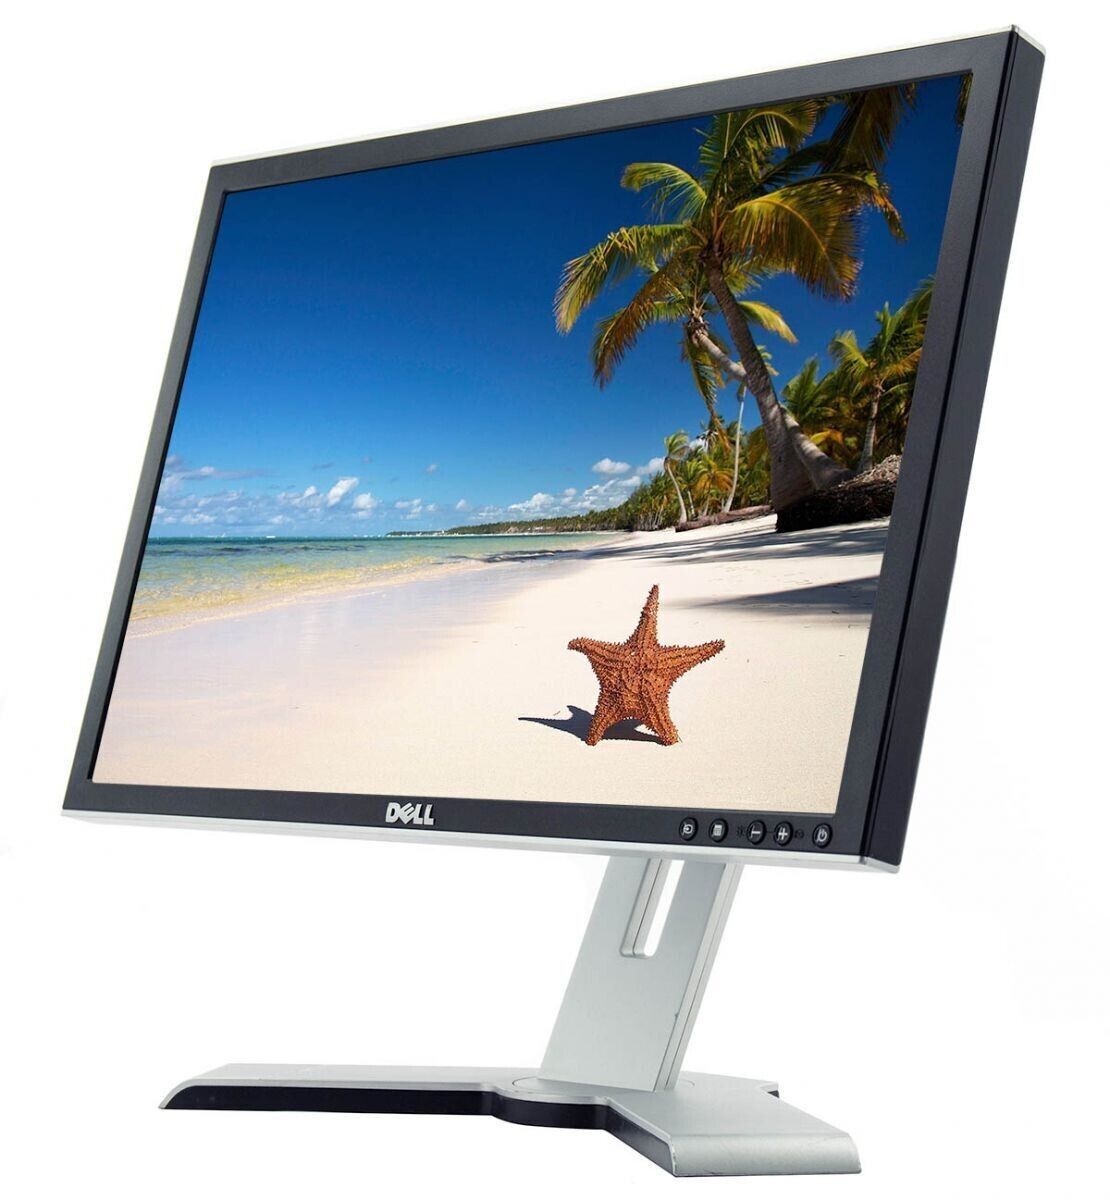 🔥Dell UltraSharp 2208WFP 22-inch Rotating Widescreen LCD Monitor Used Grade A